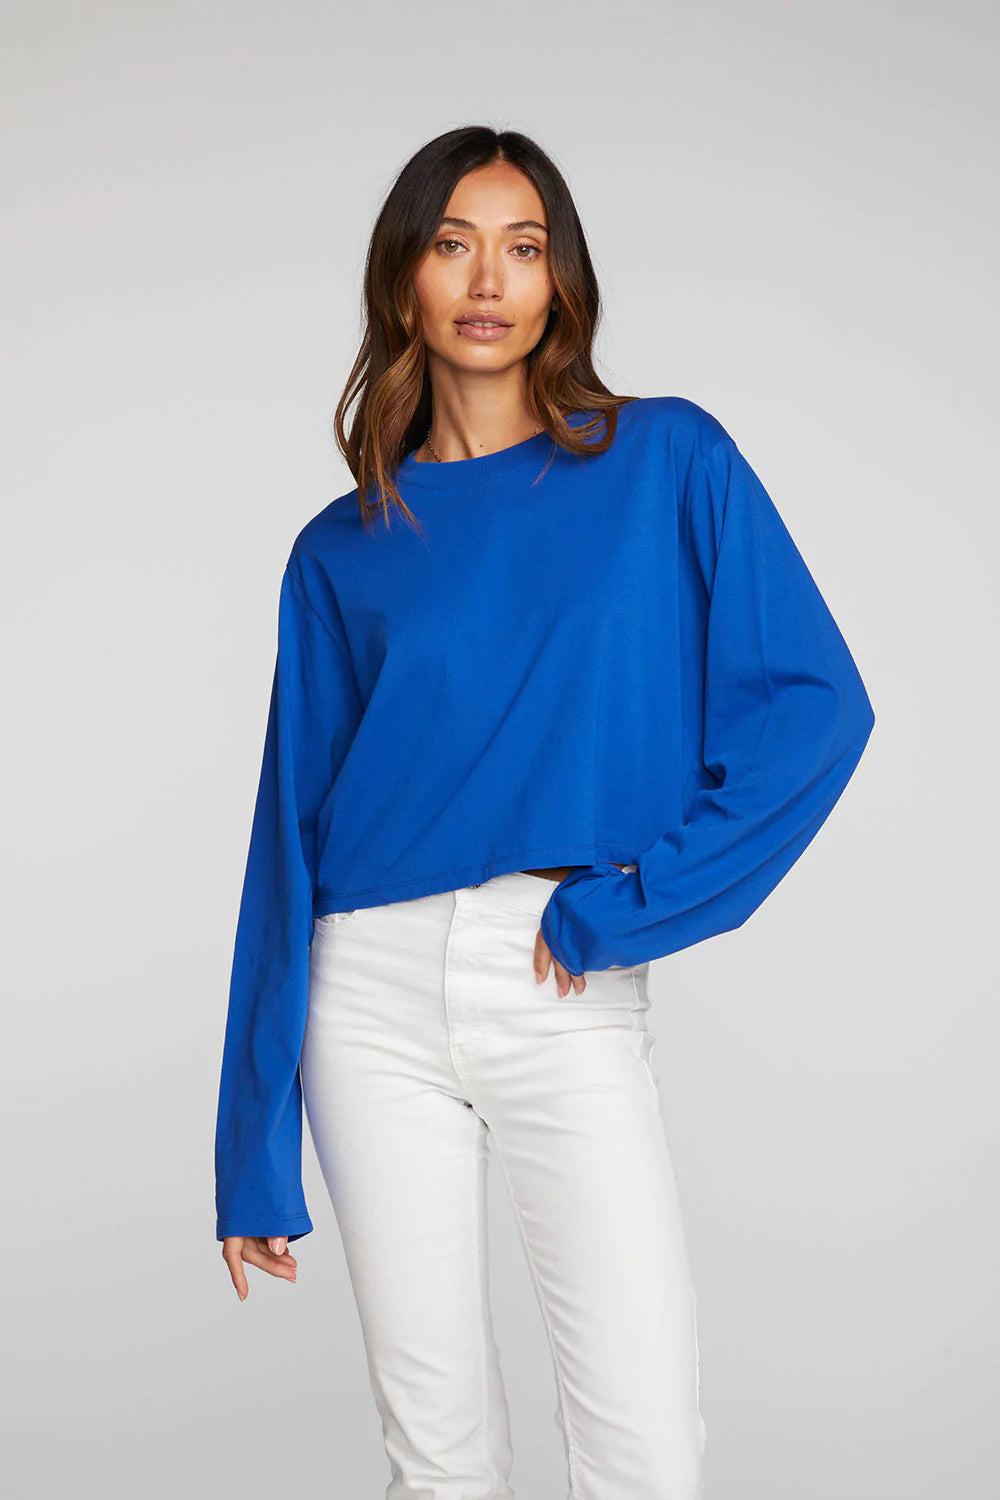 Chaser ‘Long Sleeve Crop Top’